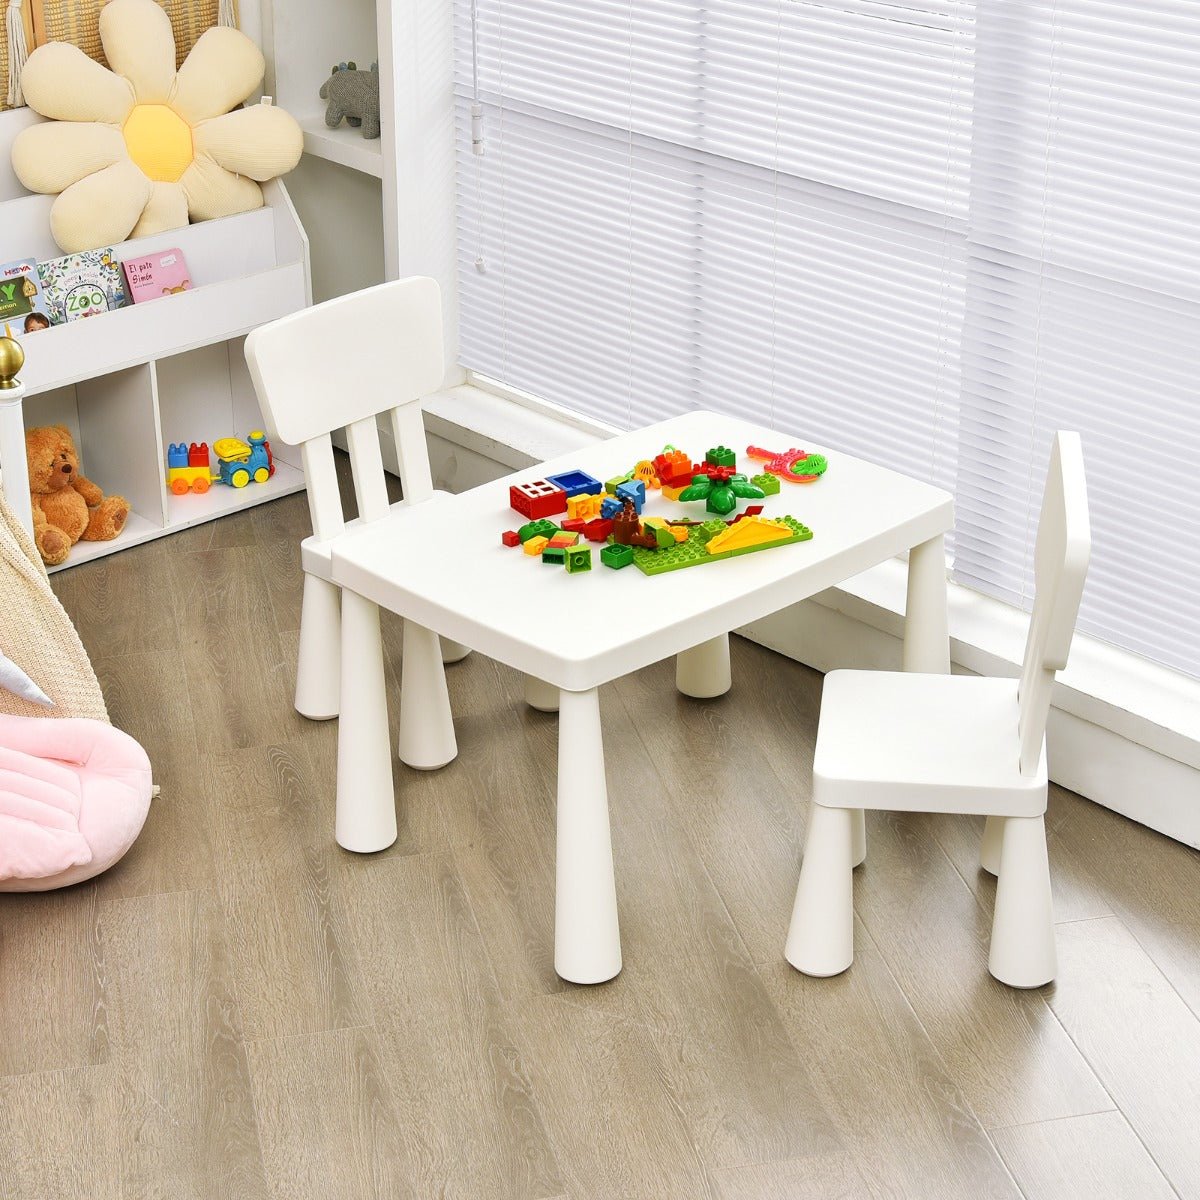 Children's Table Set with 2 Chairs - White Reading Retreat for Kids